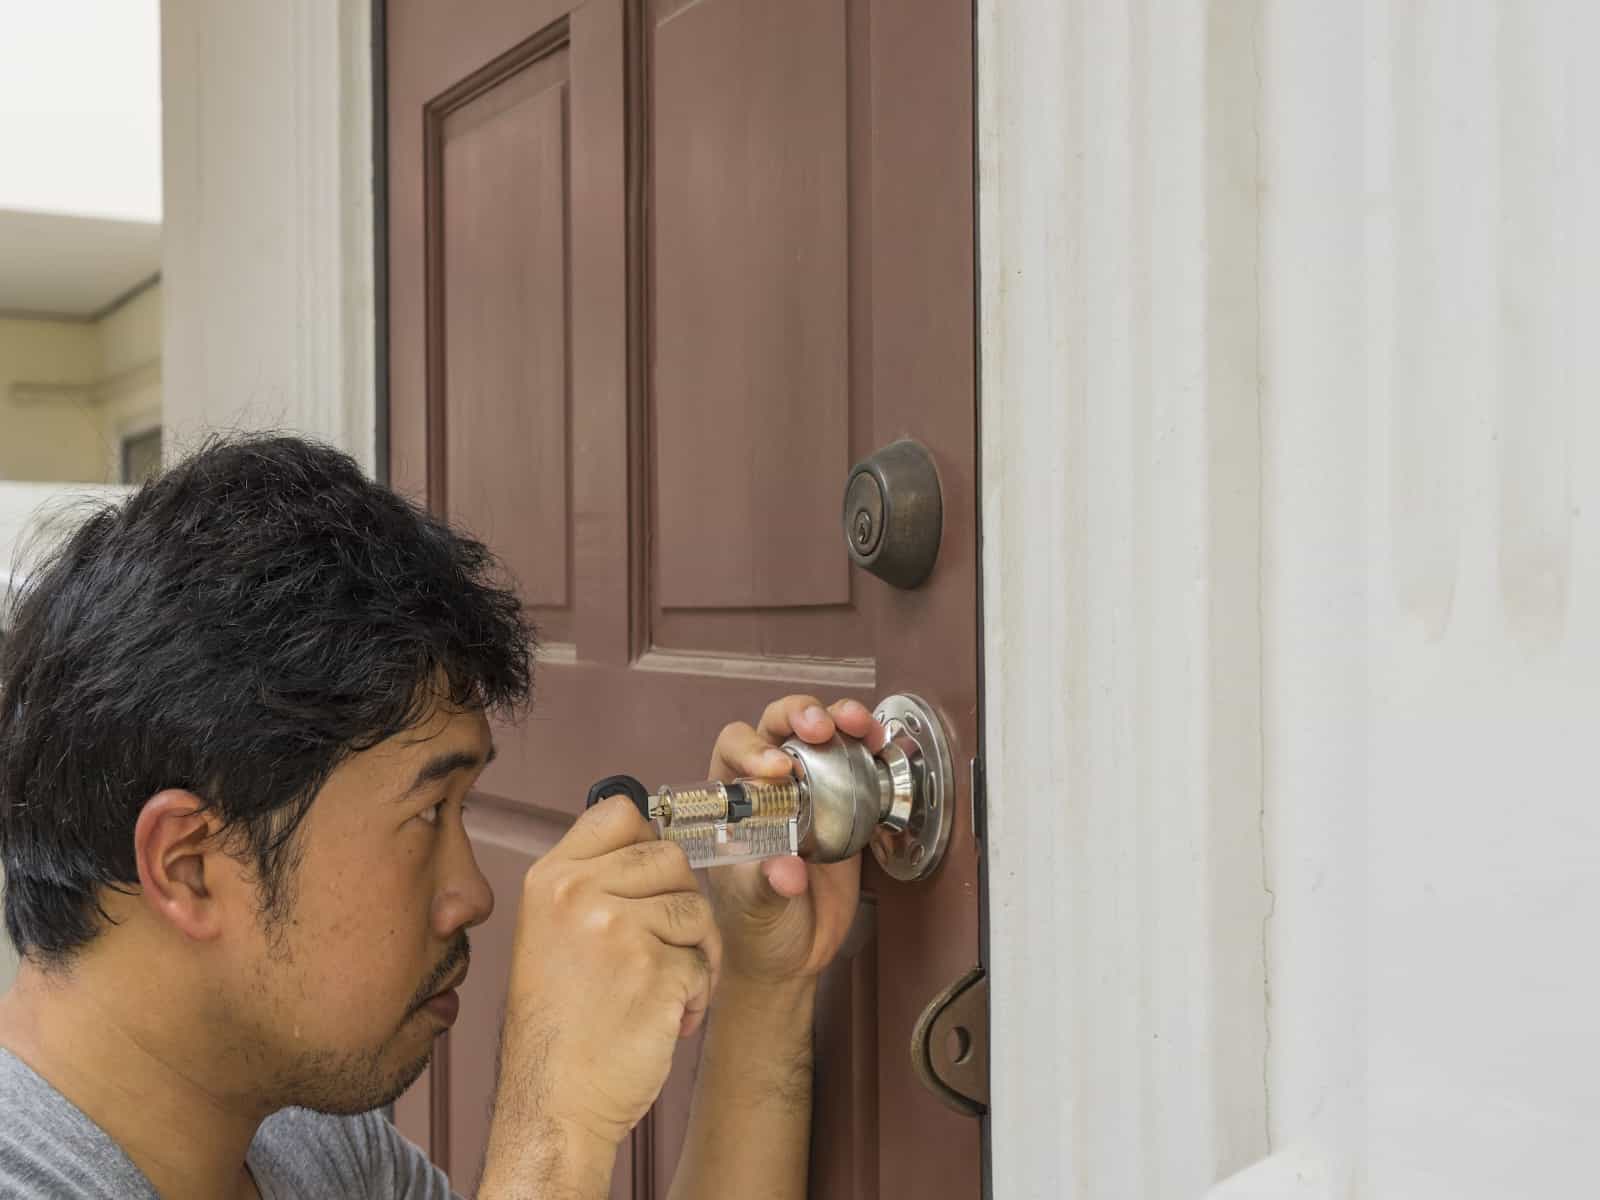 What Skills Do You Need To Be A Locksmith Technician?